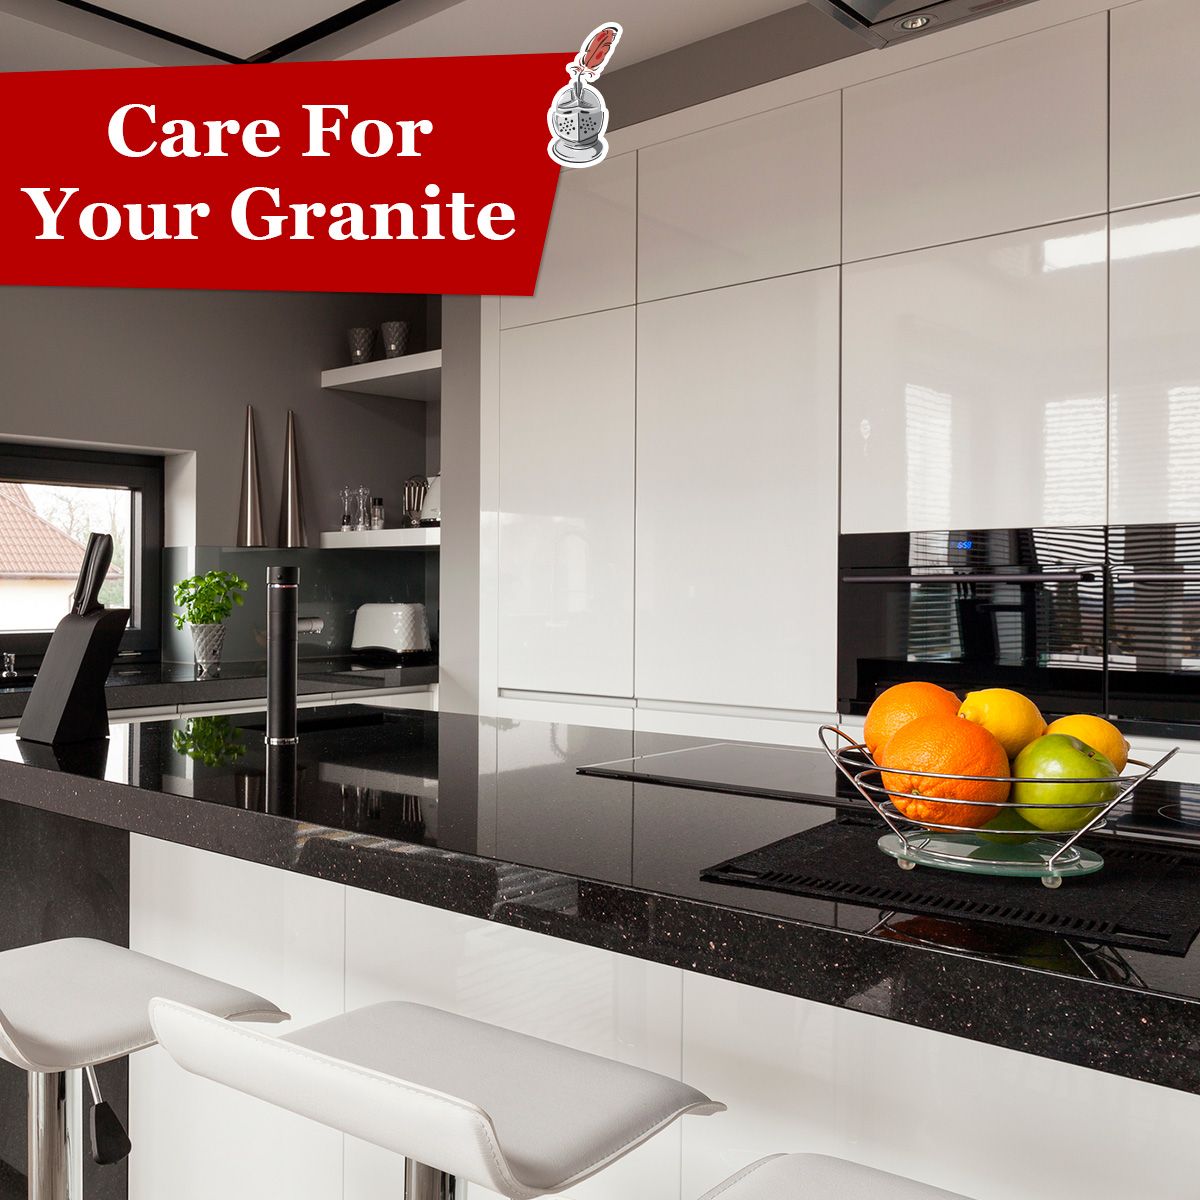 Care For Your Granite